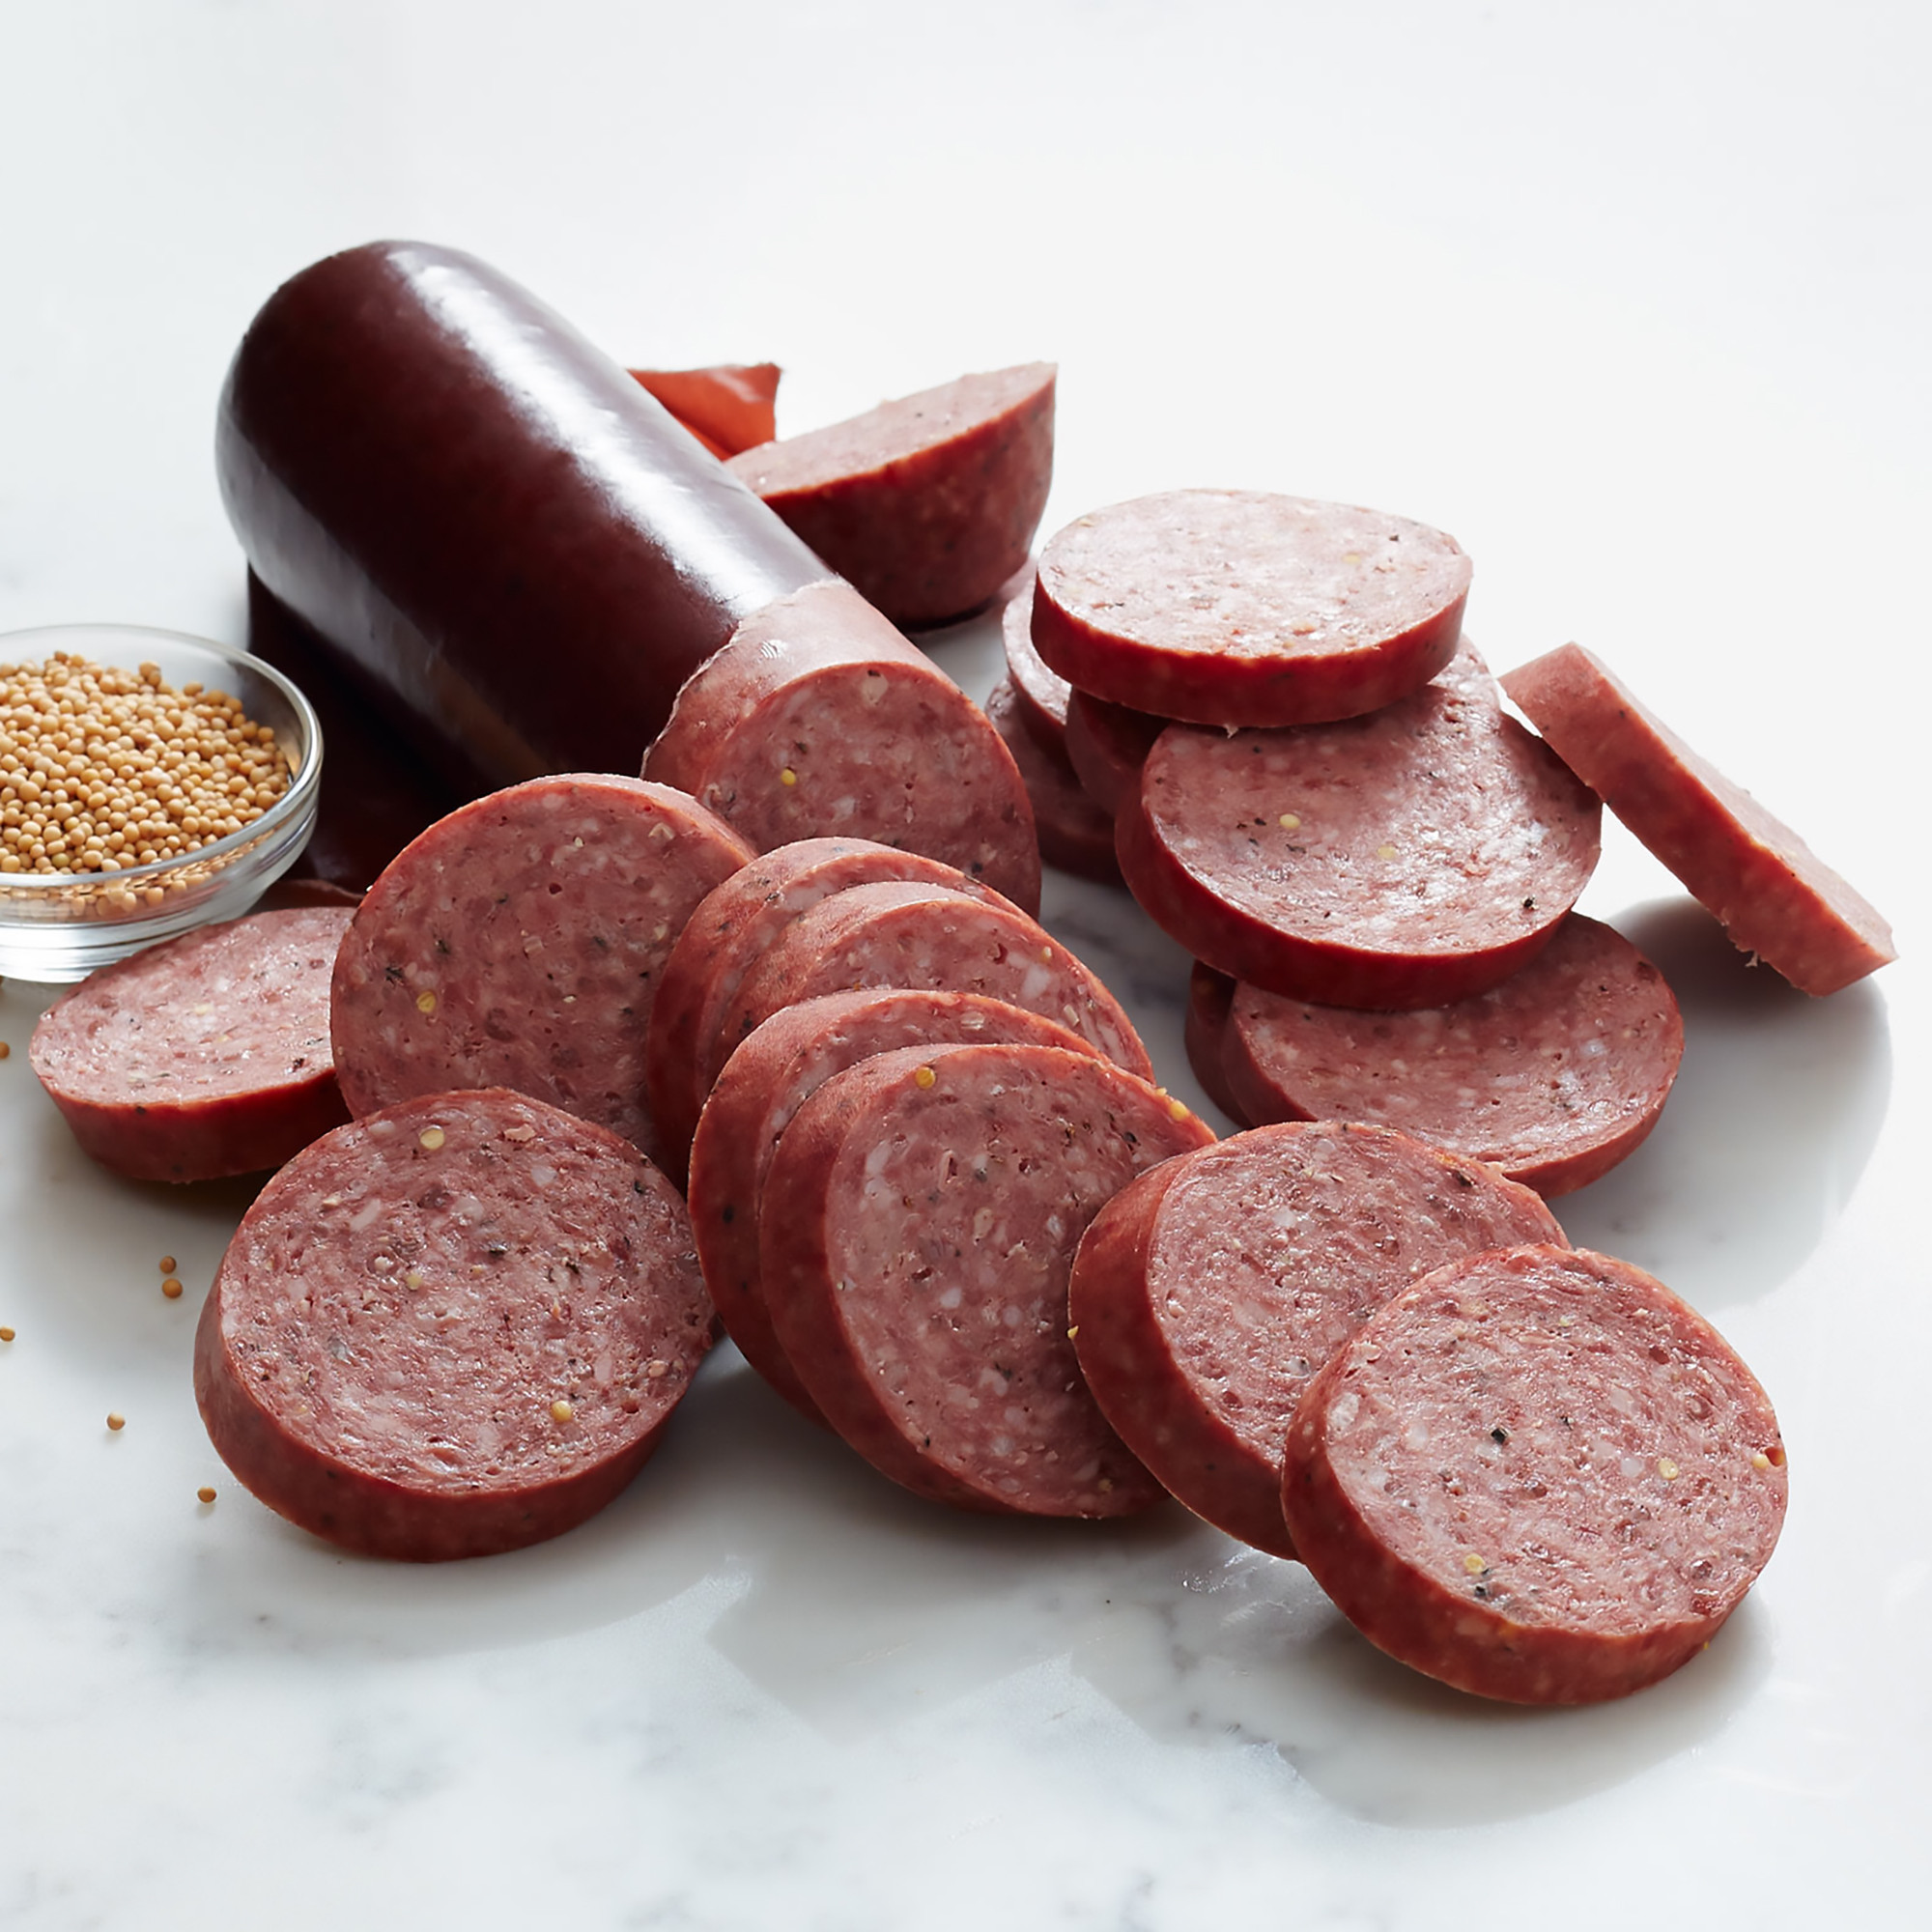 Hickory Farms Turkey Summer Sausage
 how much is 1 oz of summer sausage